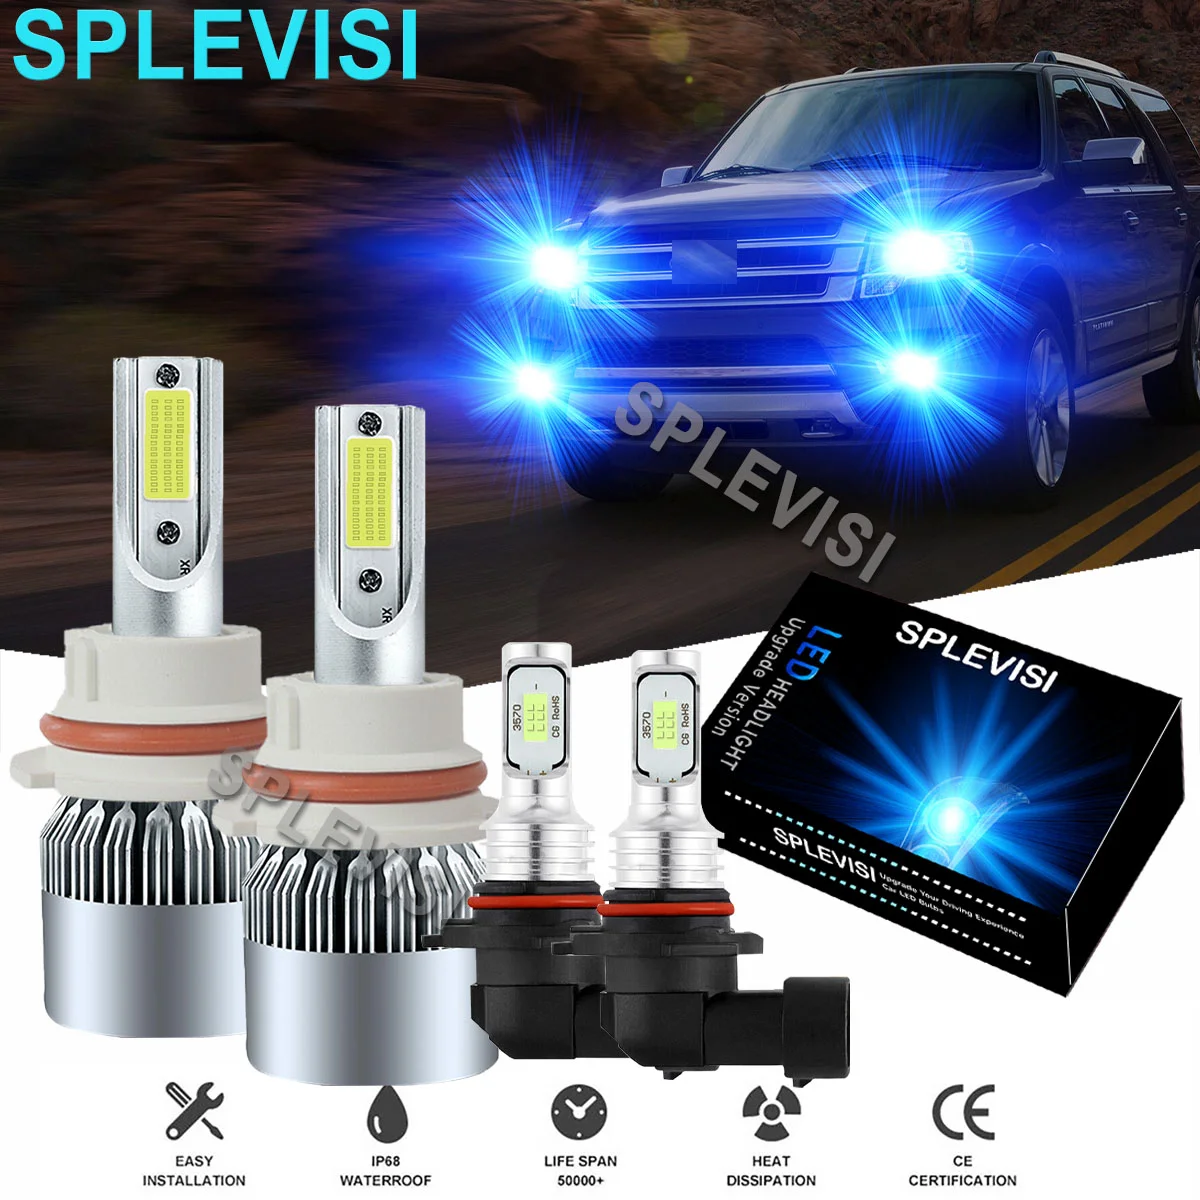 

Ice Blue Car LED Headlight Fog Light Bulbs 8000K Fit For Ford Expedition 1999-2002 Ford F 250 F 350 Super Duty 2001-2004